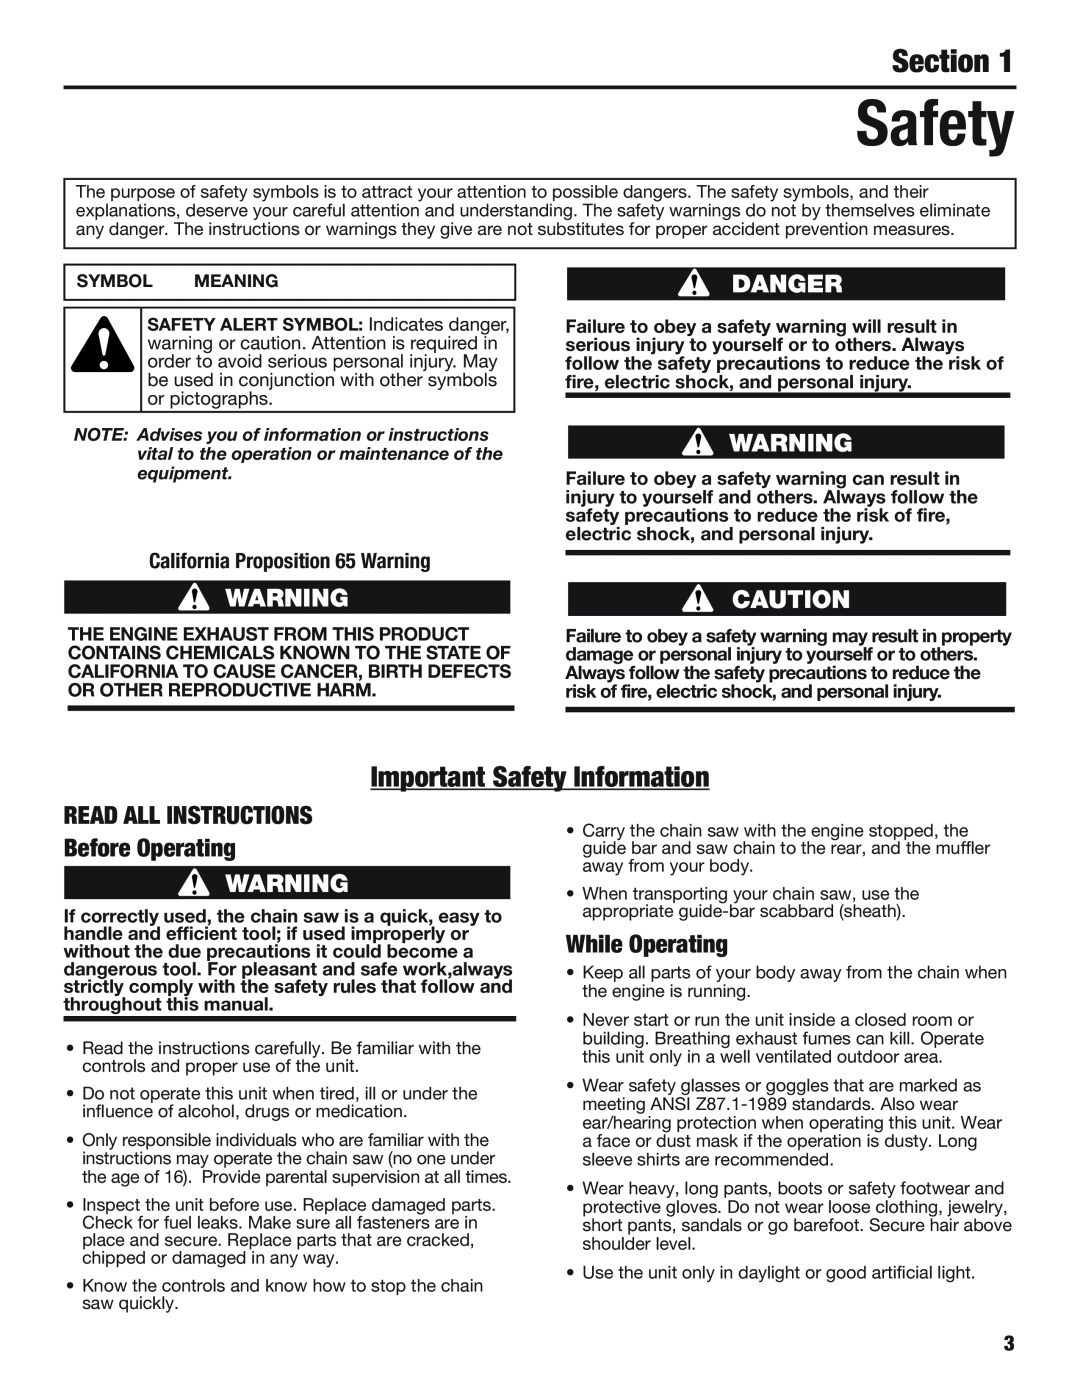 Cub Cadet CS5720 manual Section, Important Safety Information, READ ALL INSTRUCTIONS Before Operating, While Operating 